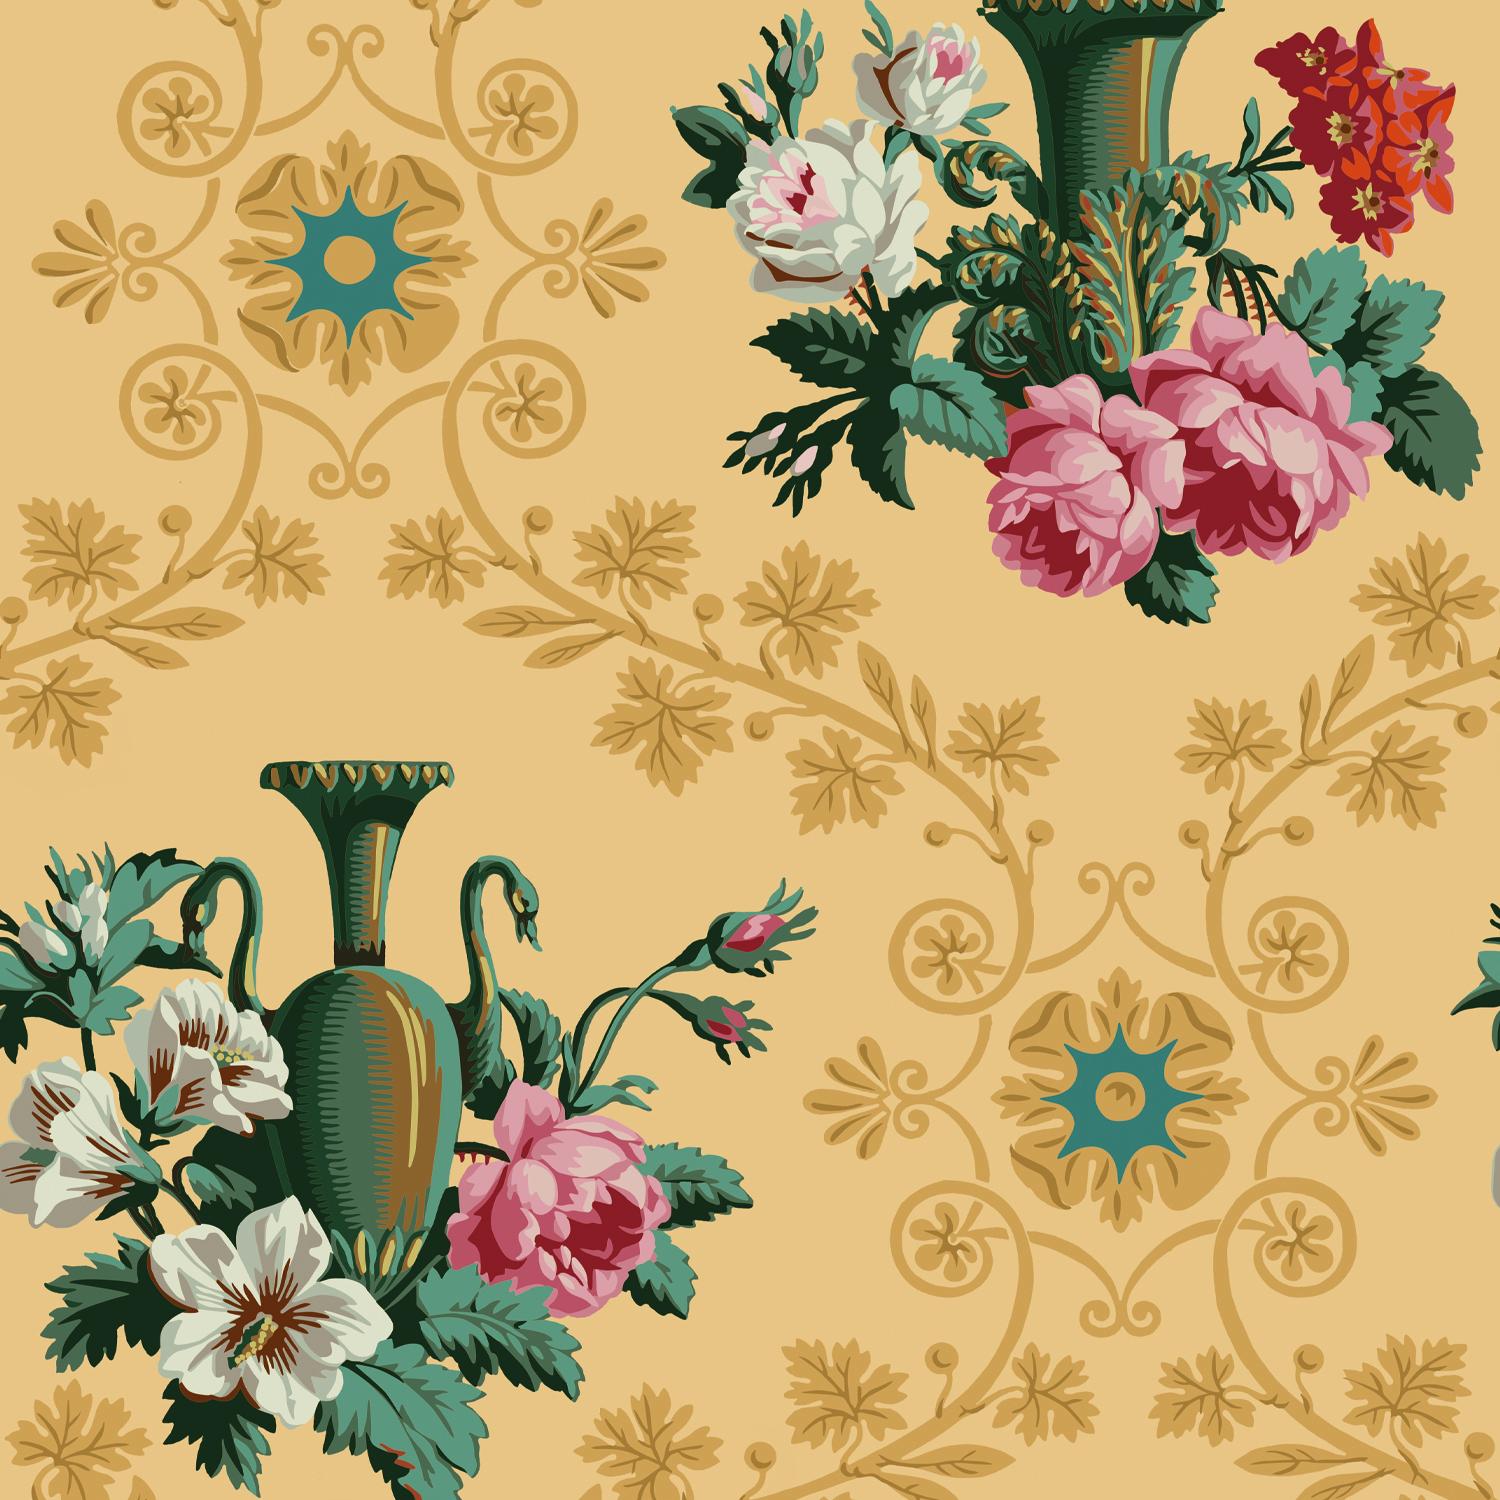 Repeat: 78,7 cm / 31 in

Founded in 2019, the French wallpaper brand Papier Francais is defined by the rediscovery, restoration, and revival of iconic wallpapers dating back to the French “Golden Age of wallpaper” of the 18th and 19th centuries.